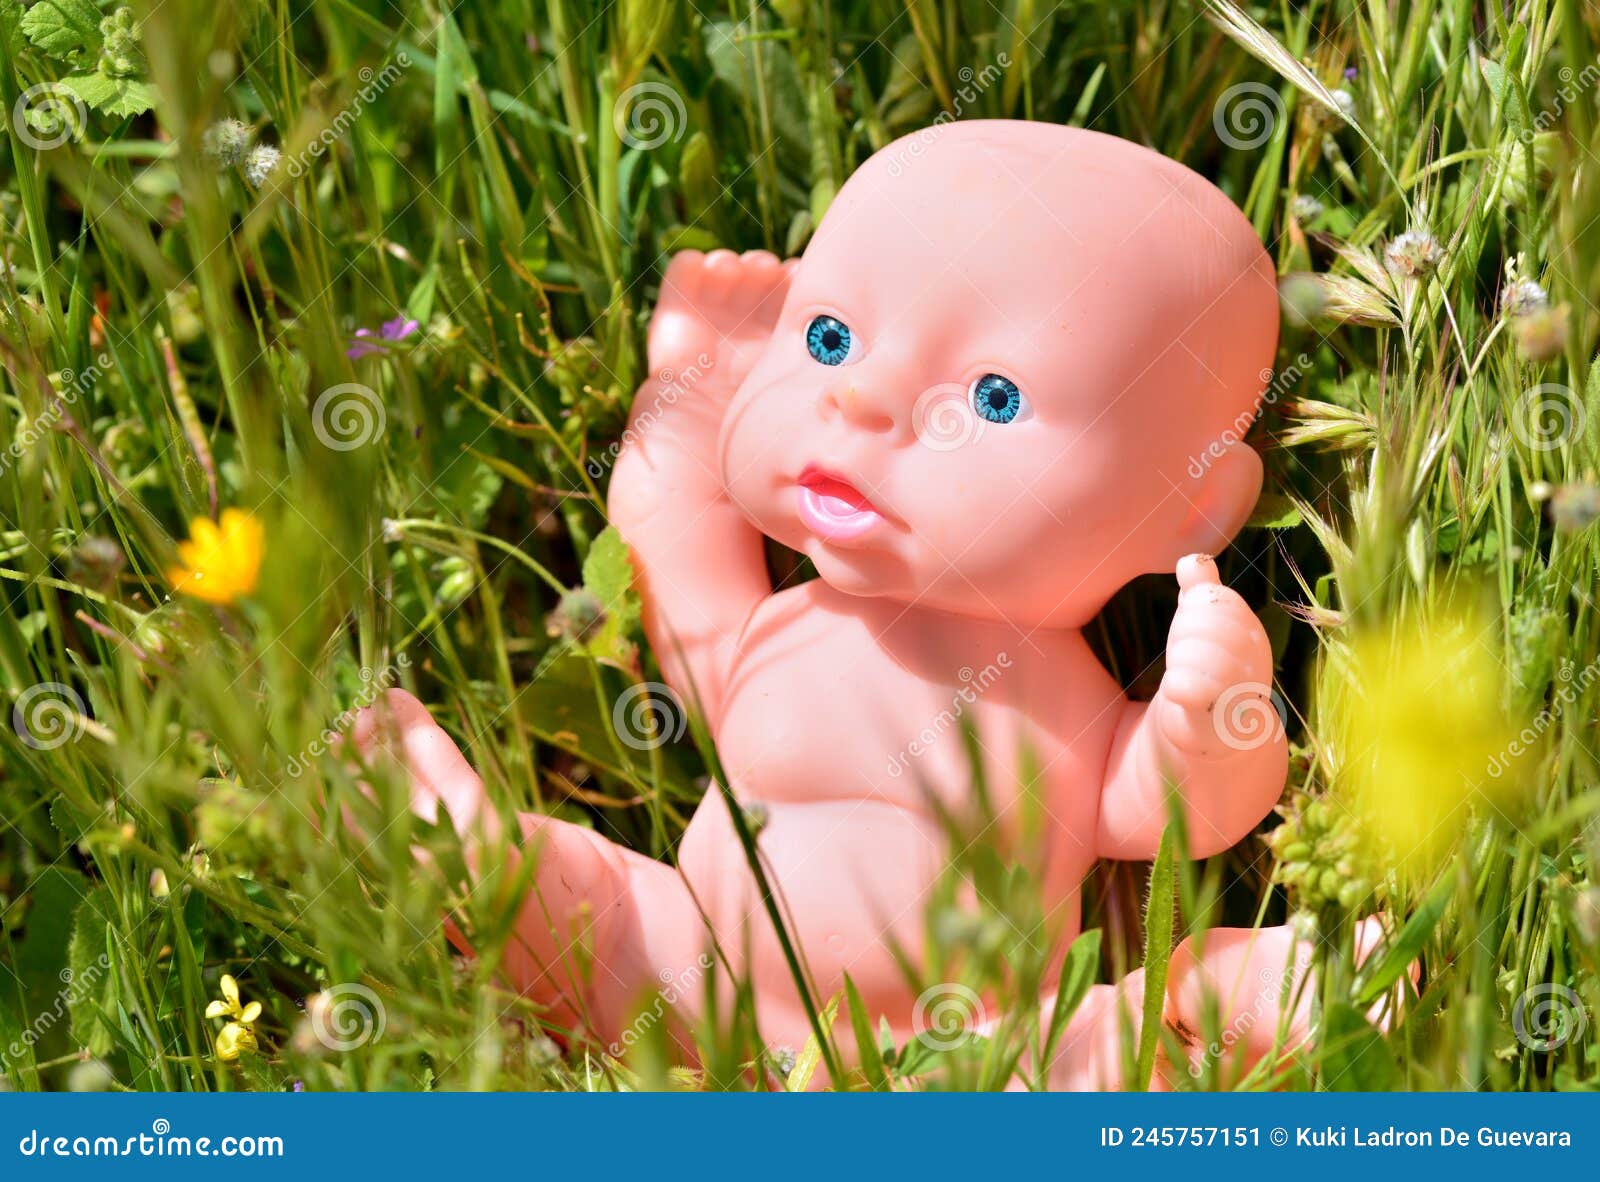 traditional baby doll among the grass